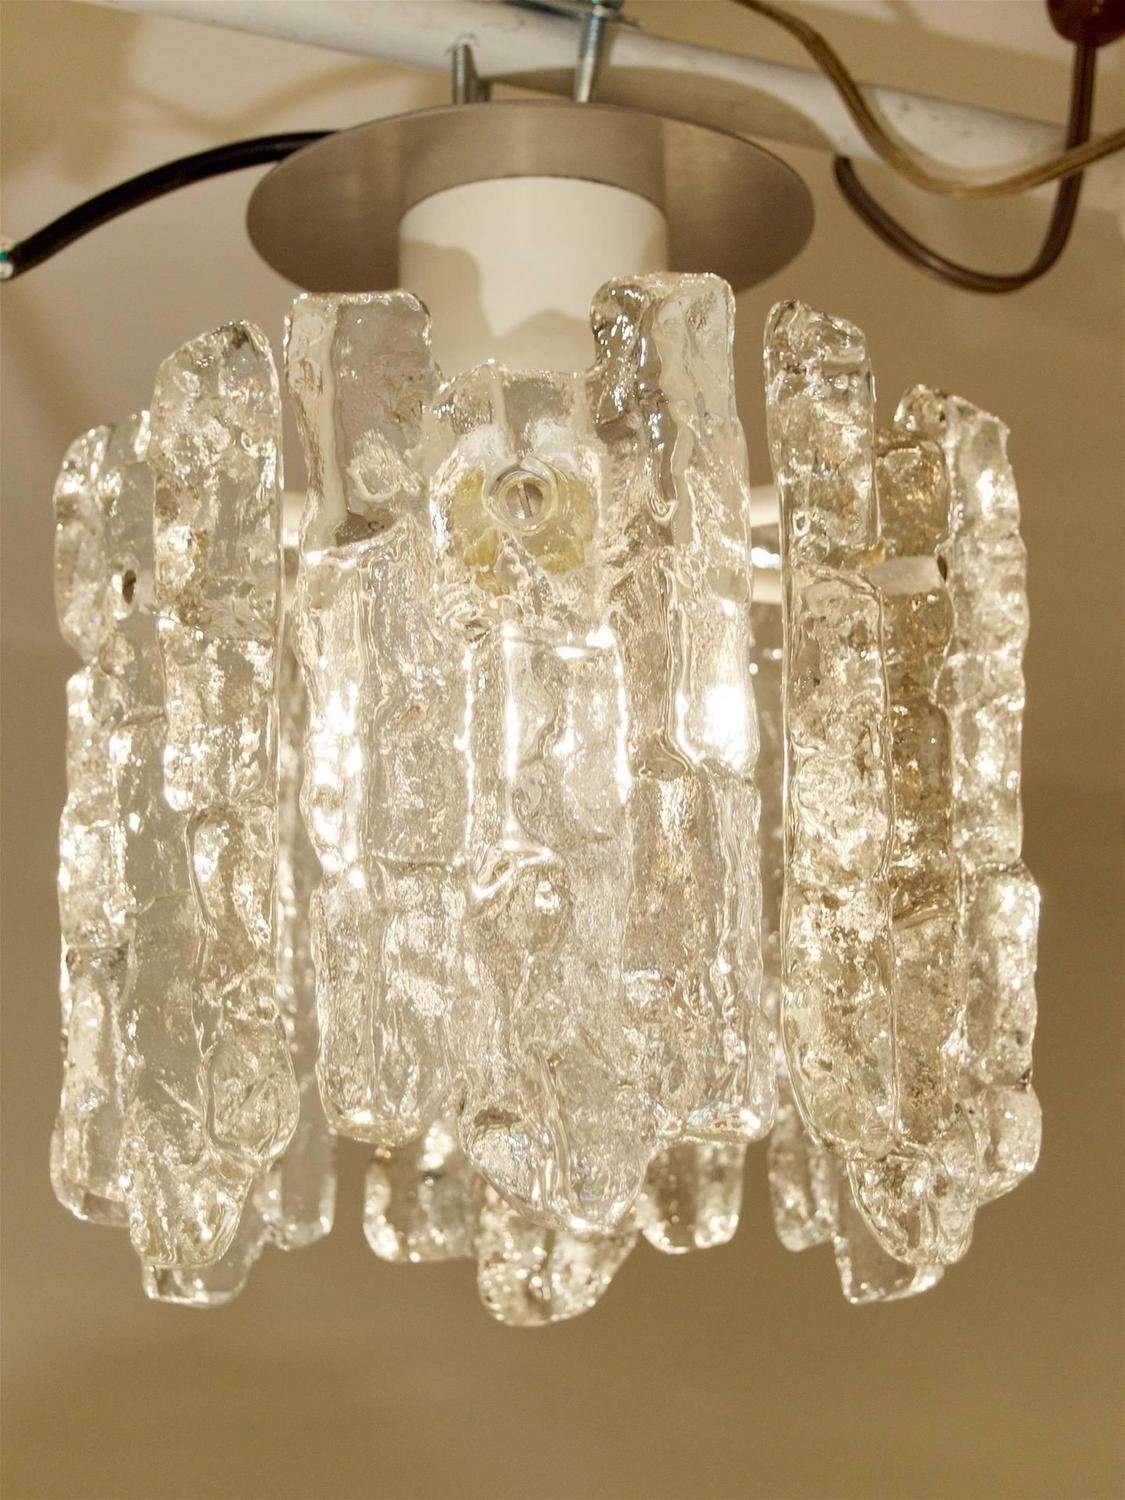 Kalmar Franken KG
Austria, 1960s

Fantastic petite ice glass flush mounted pendant with six pieces of glass.

Takes single medium base bulb, up to 100 watts. New wiring.

Due to structure of pendant drop height is not adjustable.
FLD Lighting